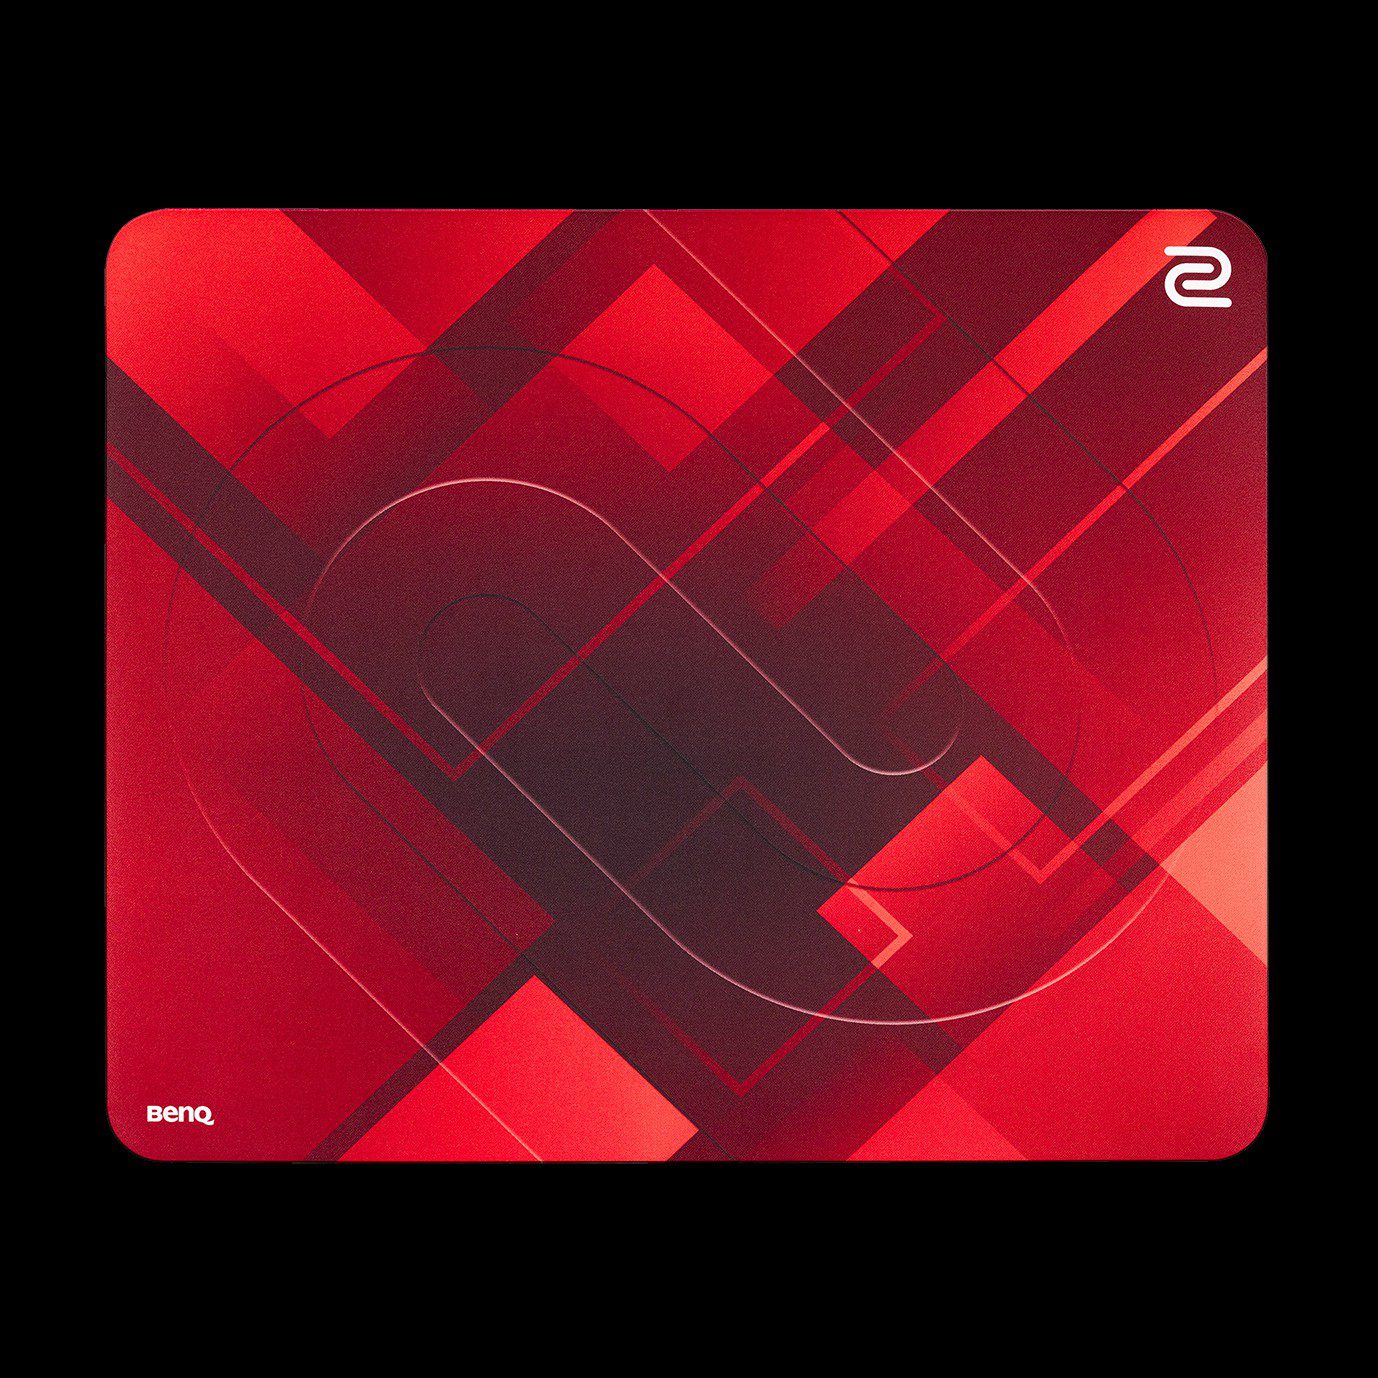 Benq Launches G Sr Se Red Esports Mousepads In India